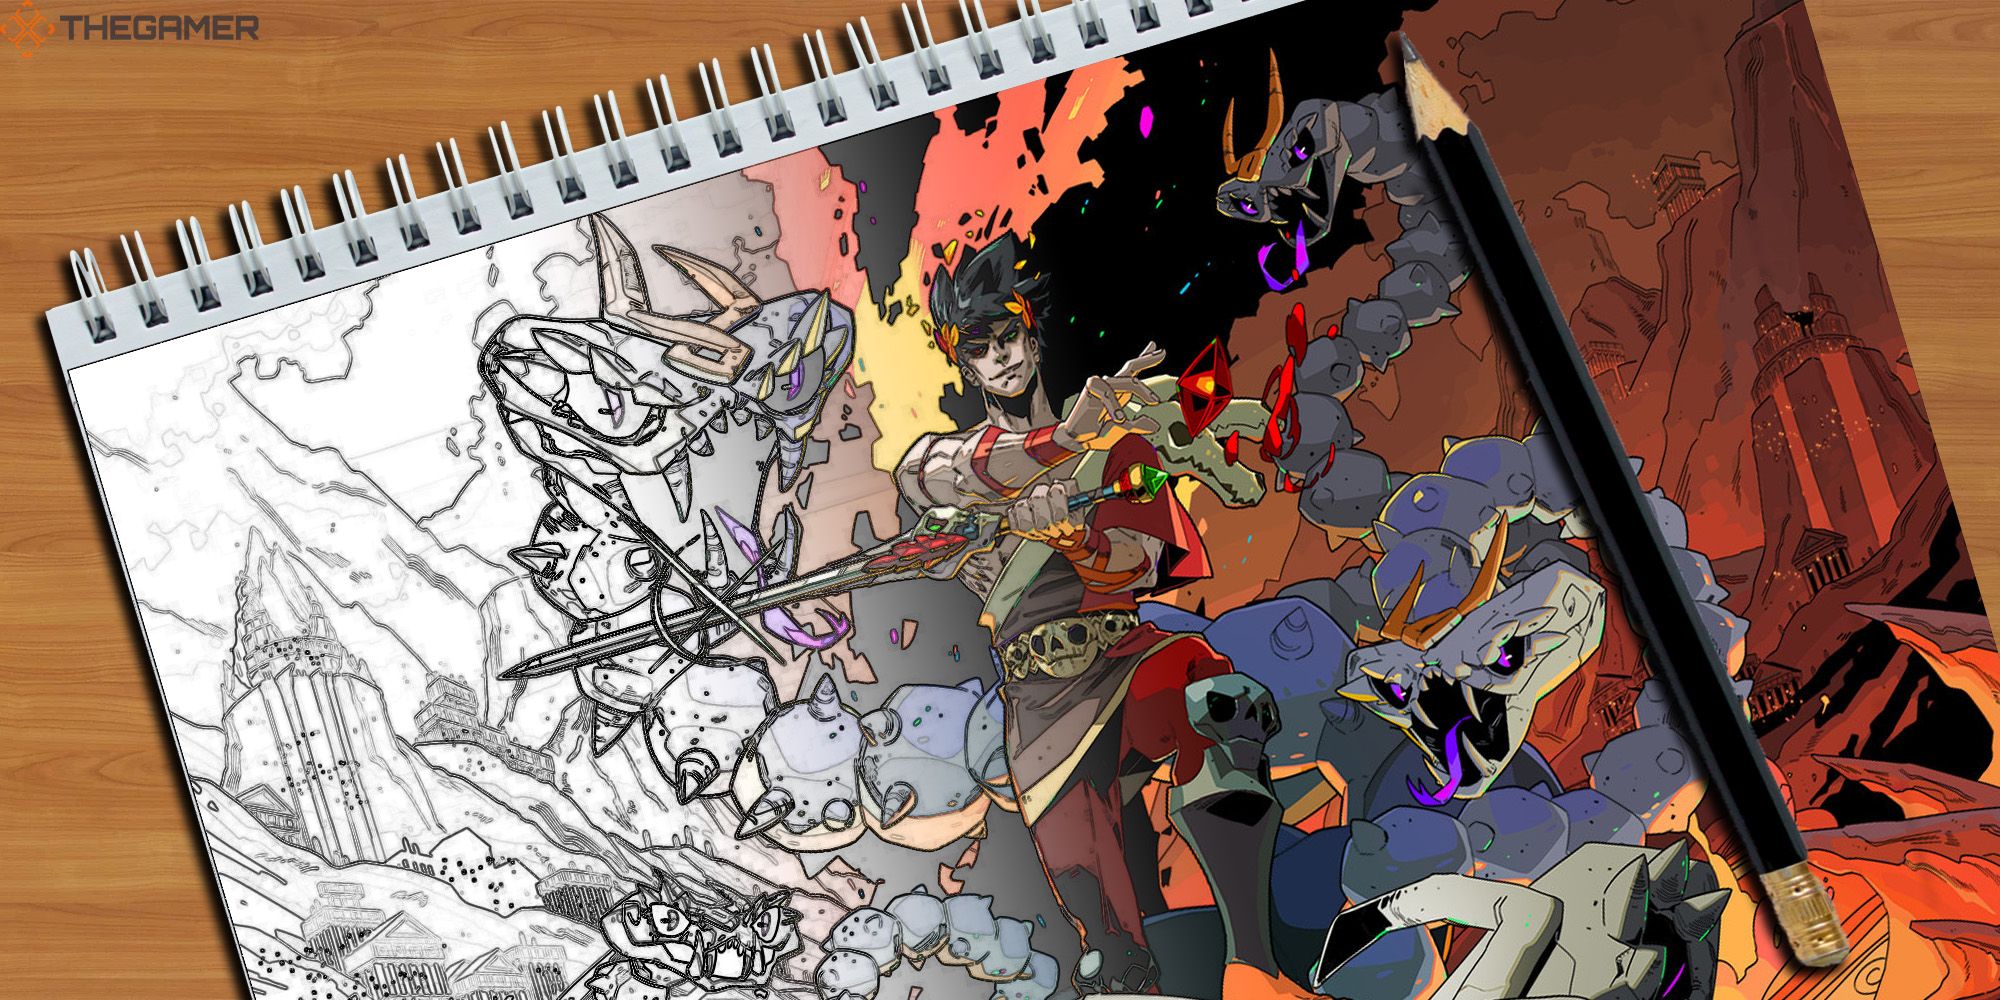 An illustration from the game Hades transforms from a black and white tracing to a colorful image in an artist's sketchbook. Feature image for TG.